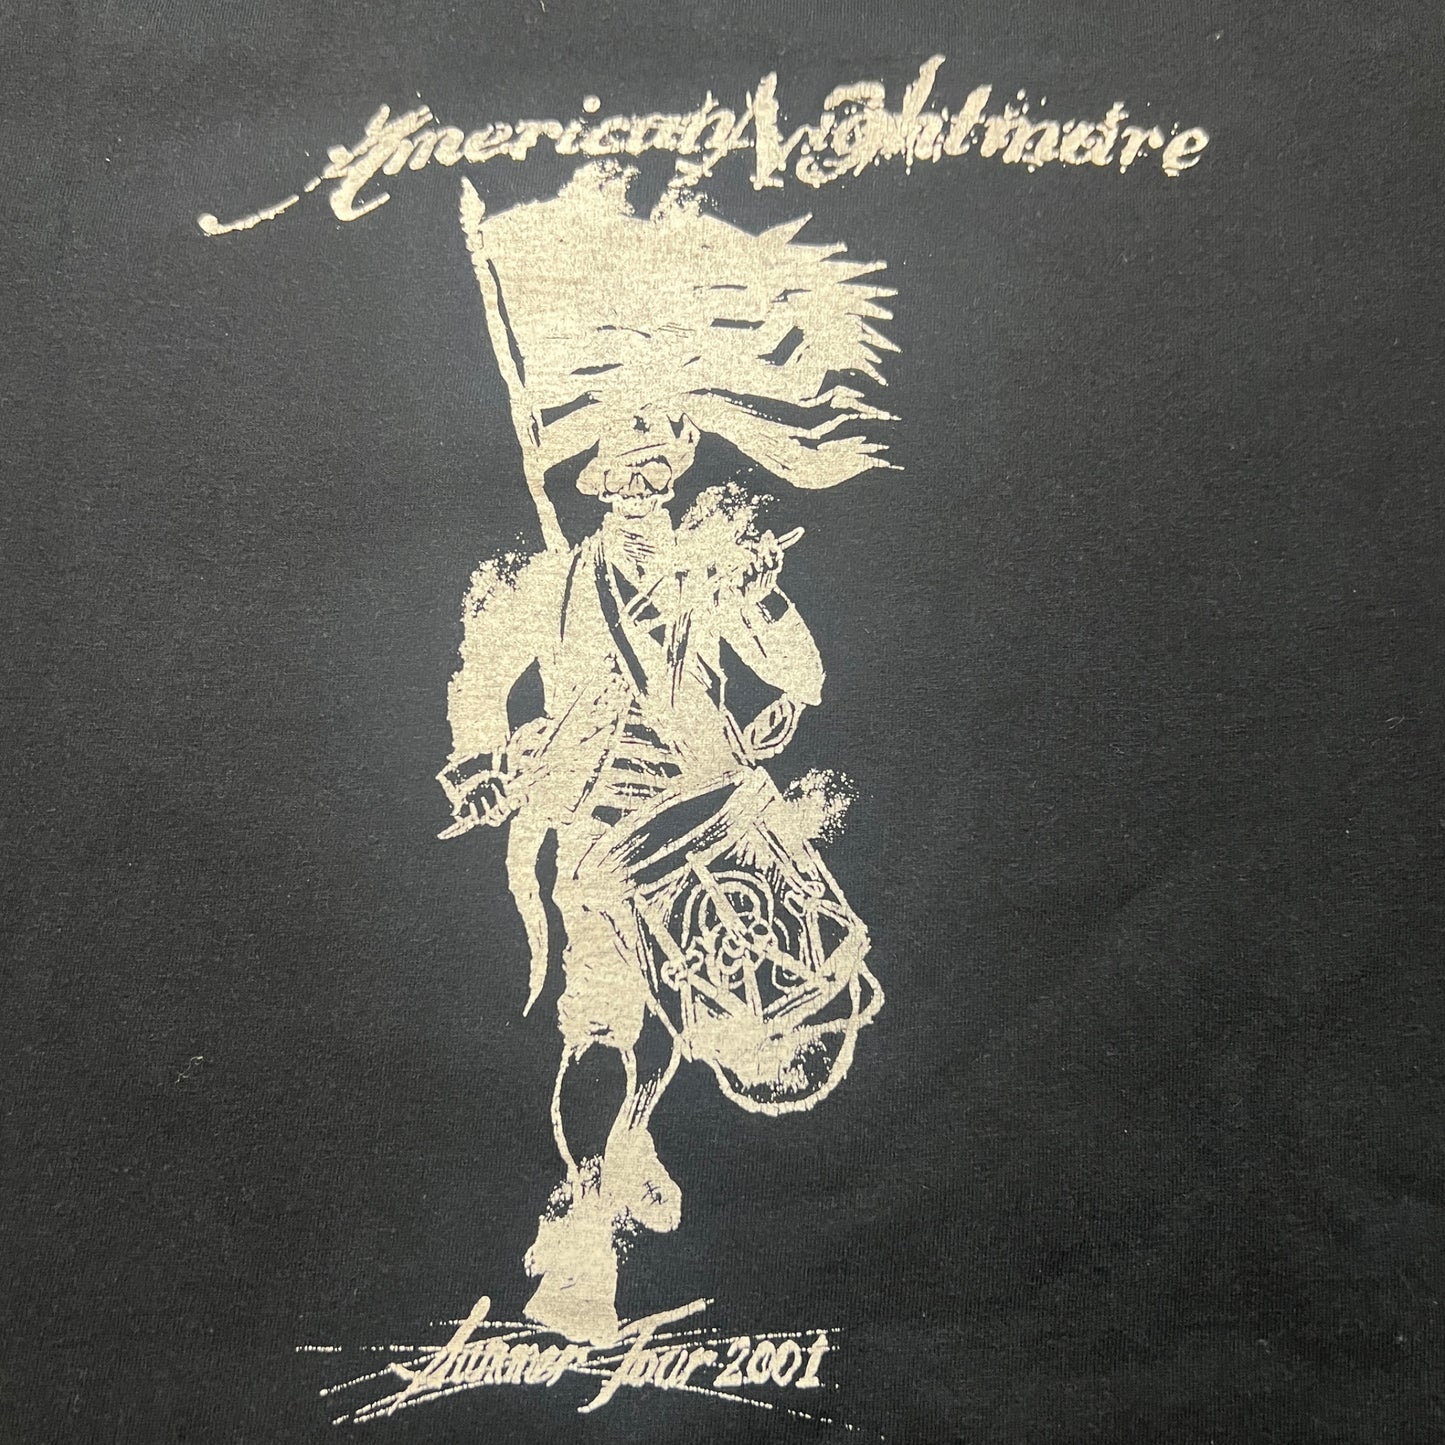 American Nightmare Band 2001 Tour T-Shirt Size XL Give Up The Ghost